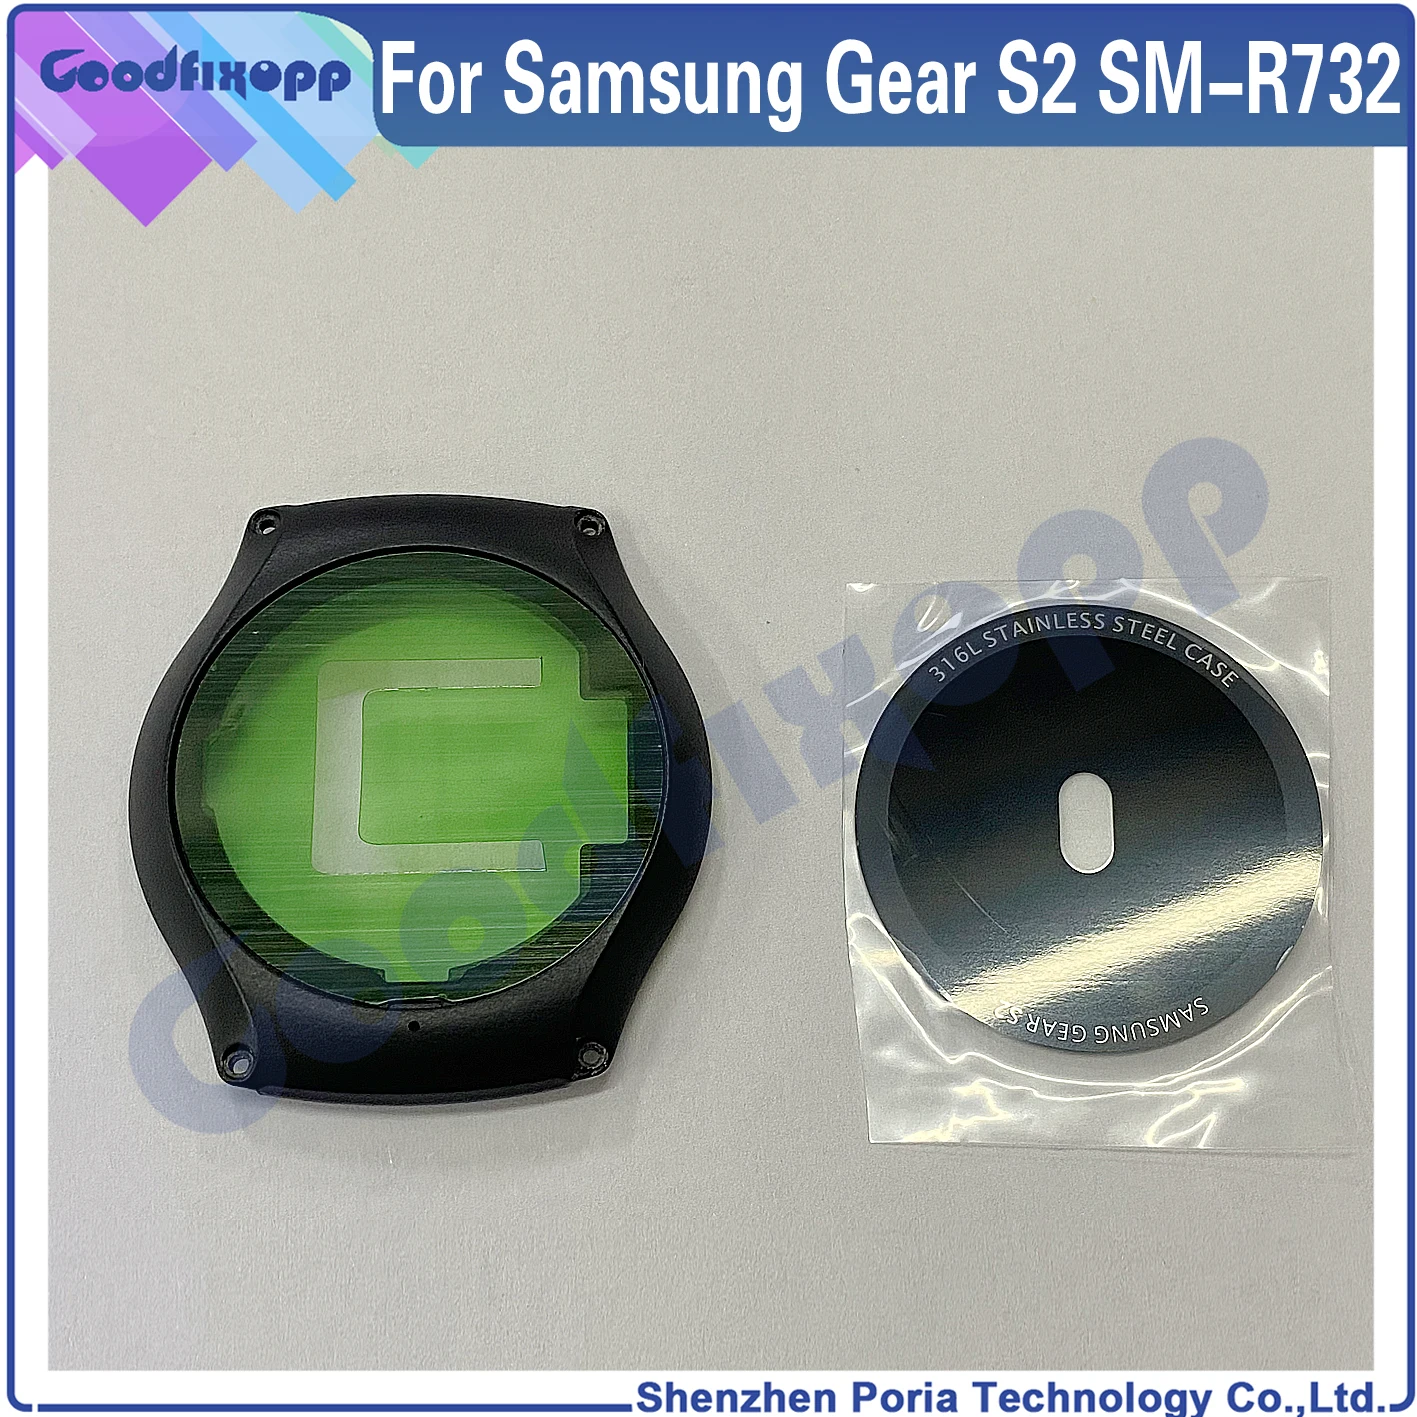 For Samsung Gear S2 SM-R732 R732 Watch Housing Shell Battery Cover Back Case Rear Cover Glass Lens